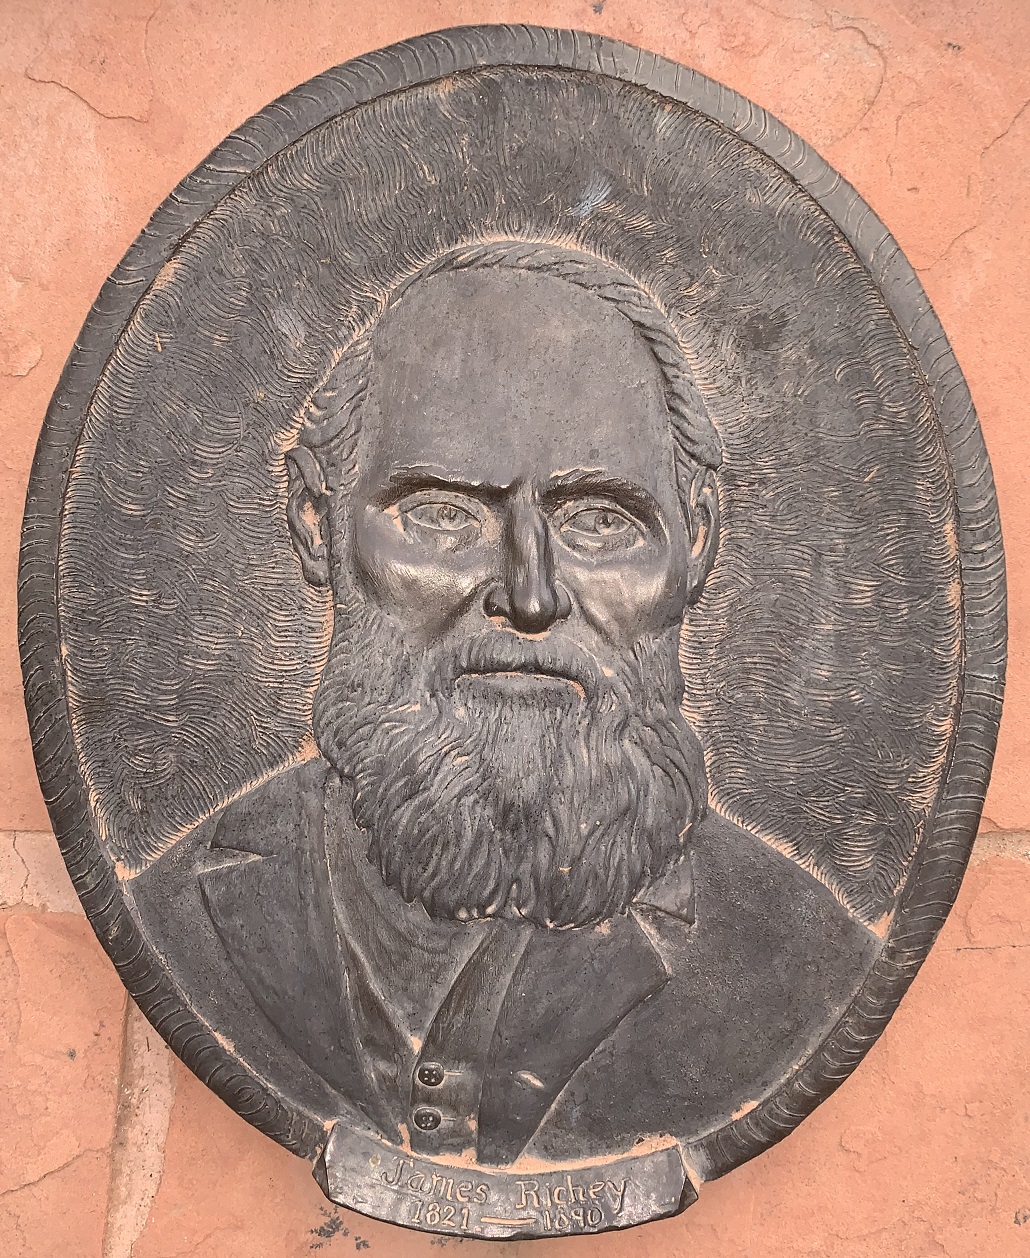 Face plaque of James Richey at the Monument Plaza in Washington, Utah